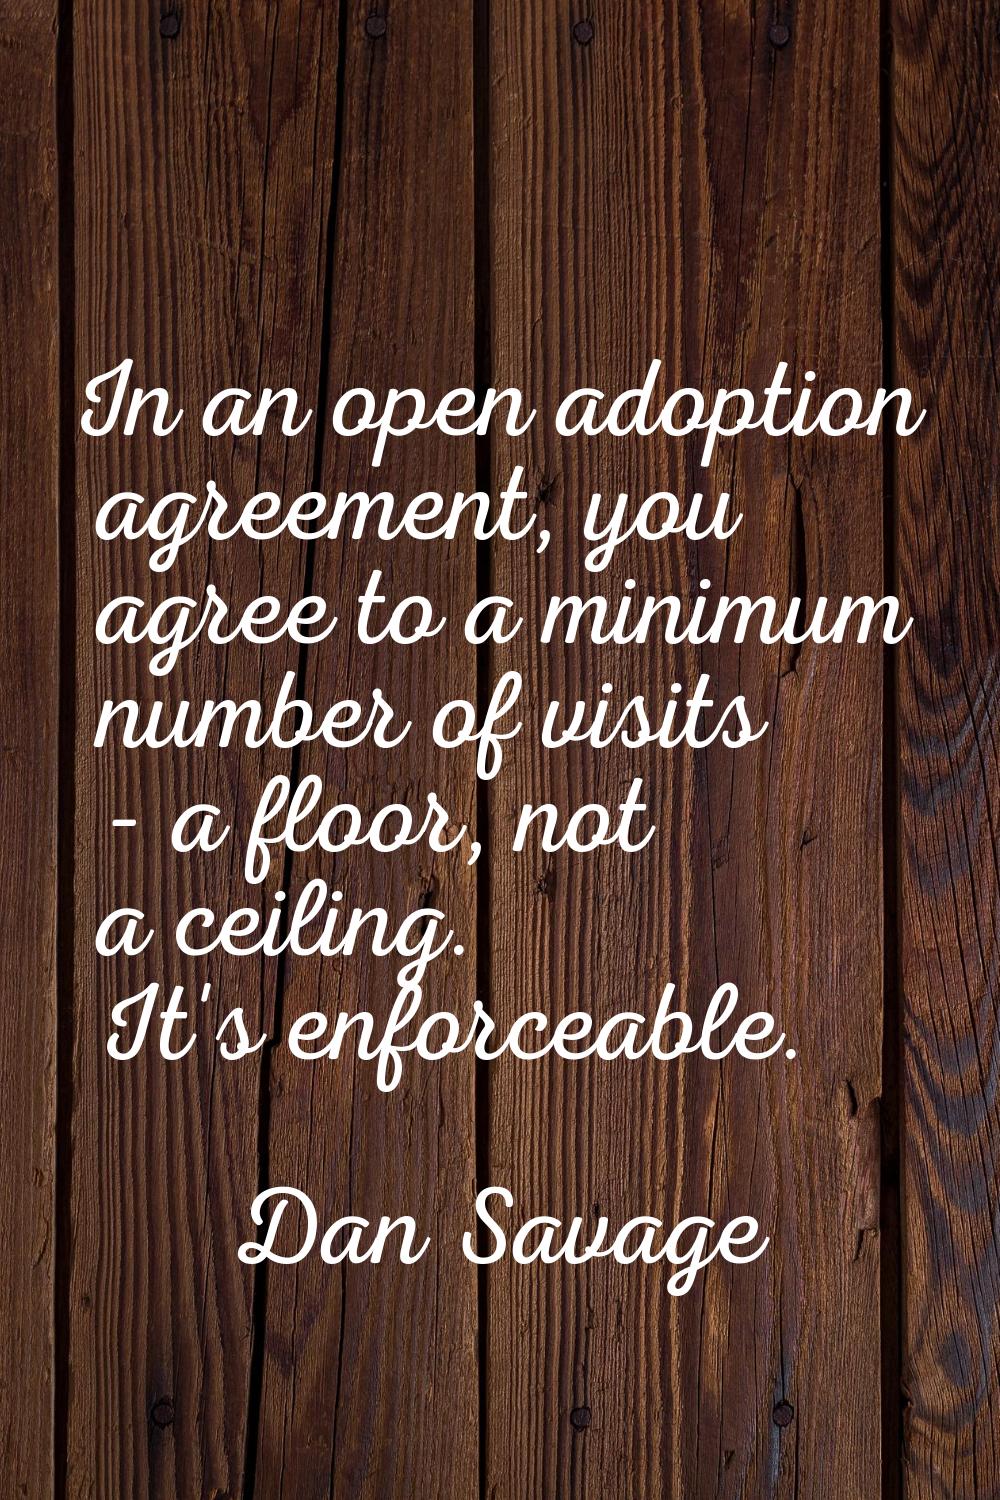 In an open adoption agreement, you agree to a minimum number of visits - a floor, not a ceiling. It